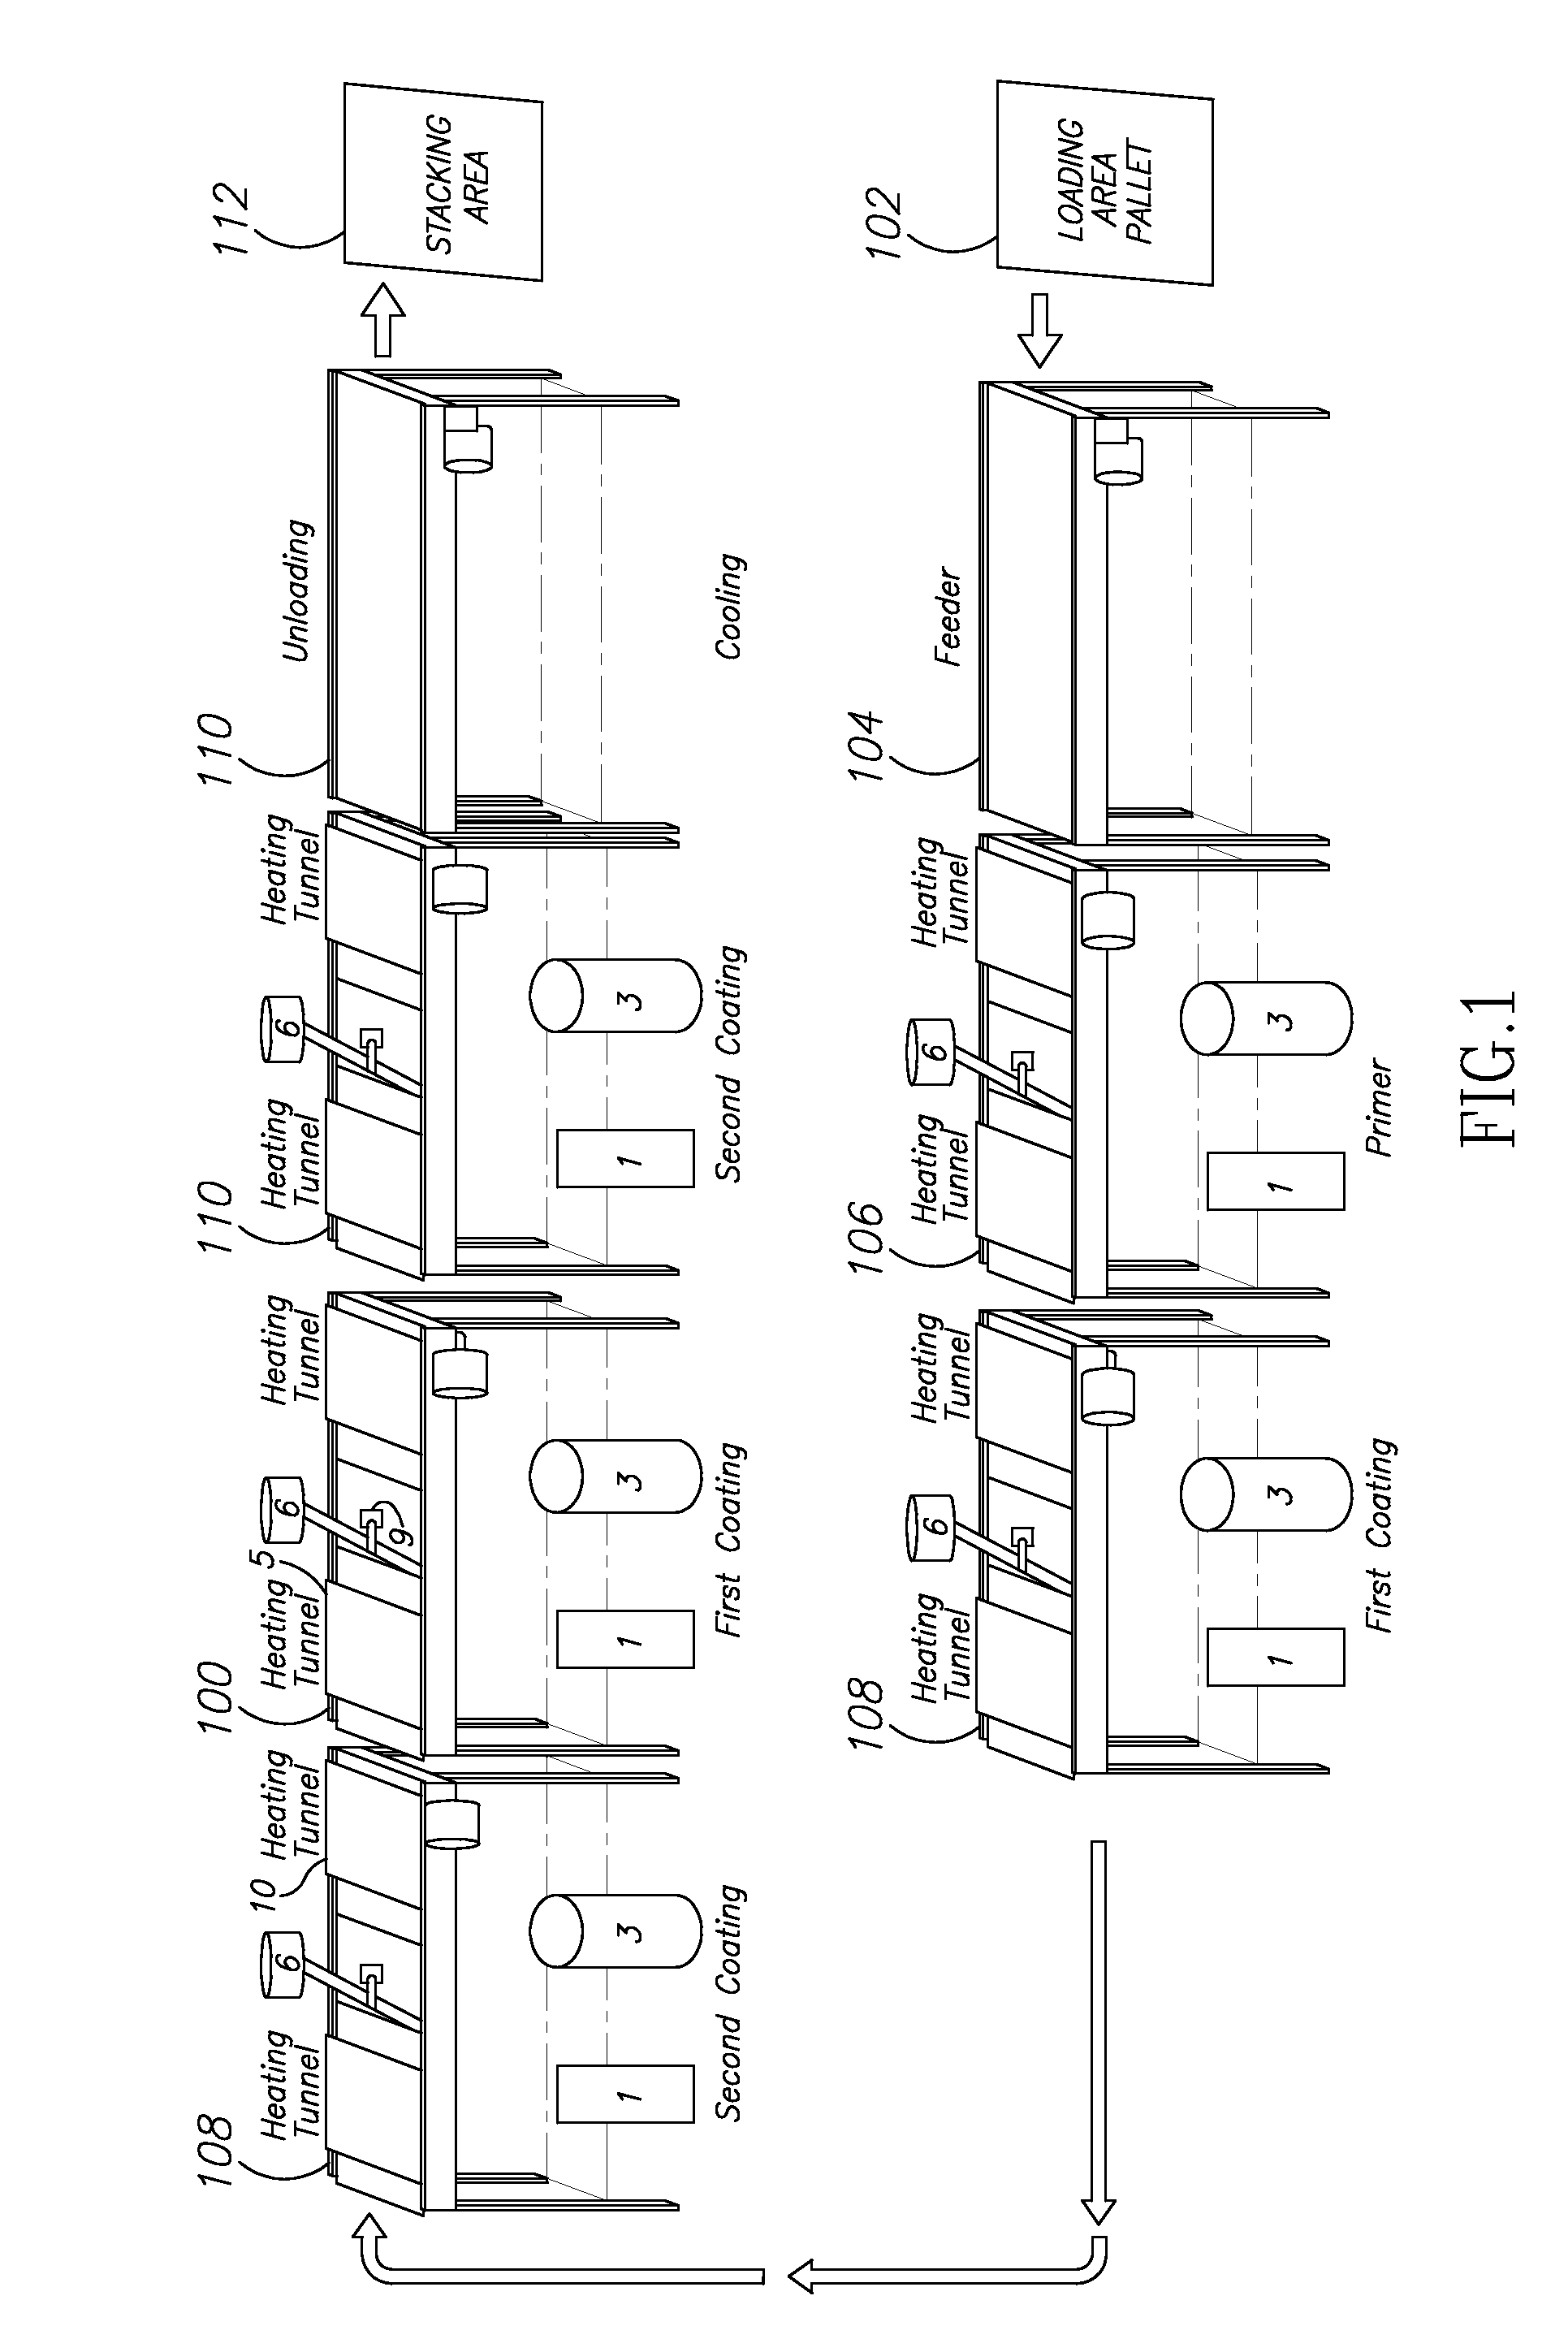 Fire resistant paint, articles of manufacture, an apparatus for manufacture and a process for manufacture thereof